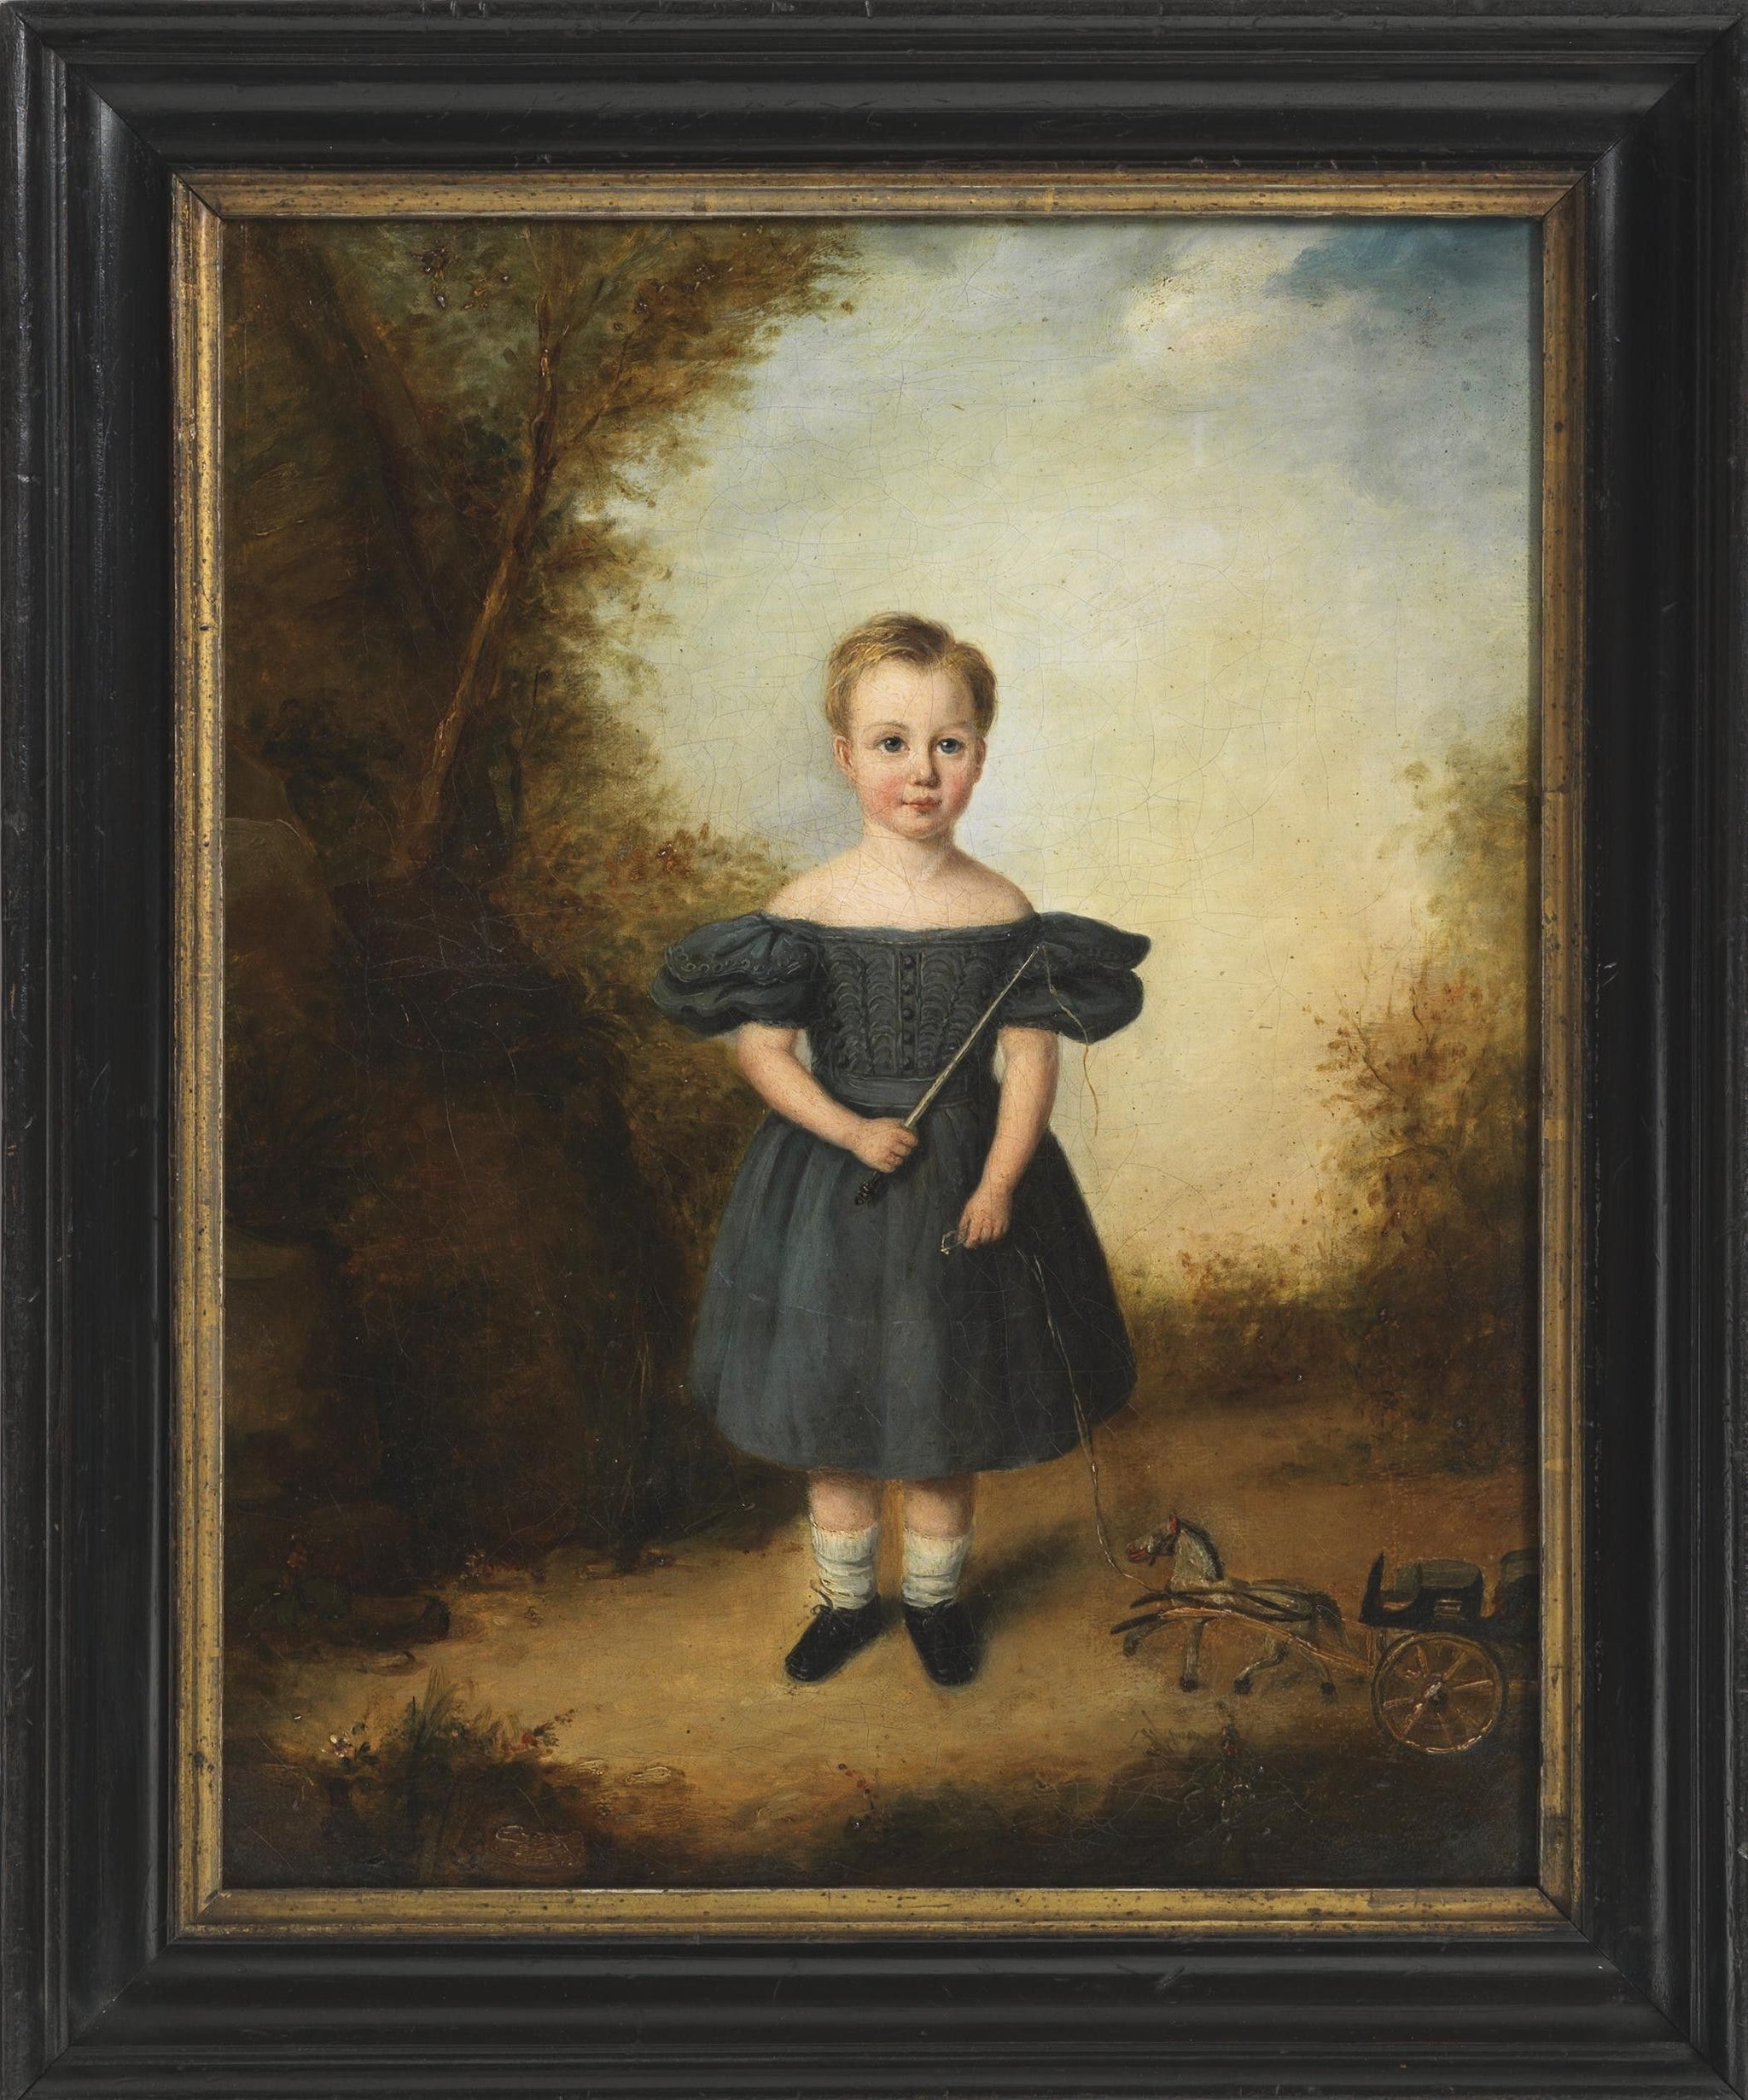 Portrait Of A Child With Toy Horse and Cart